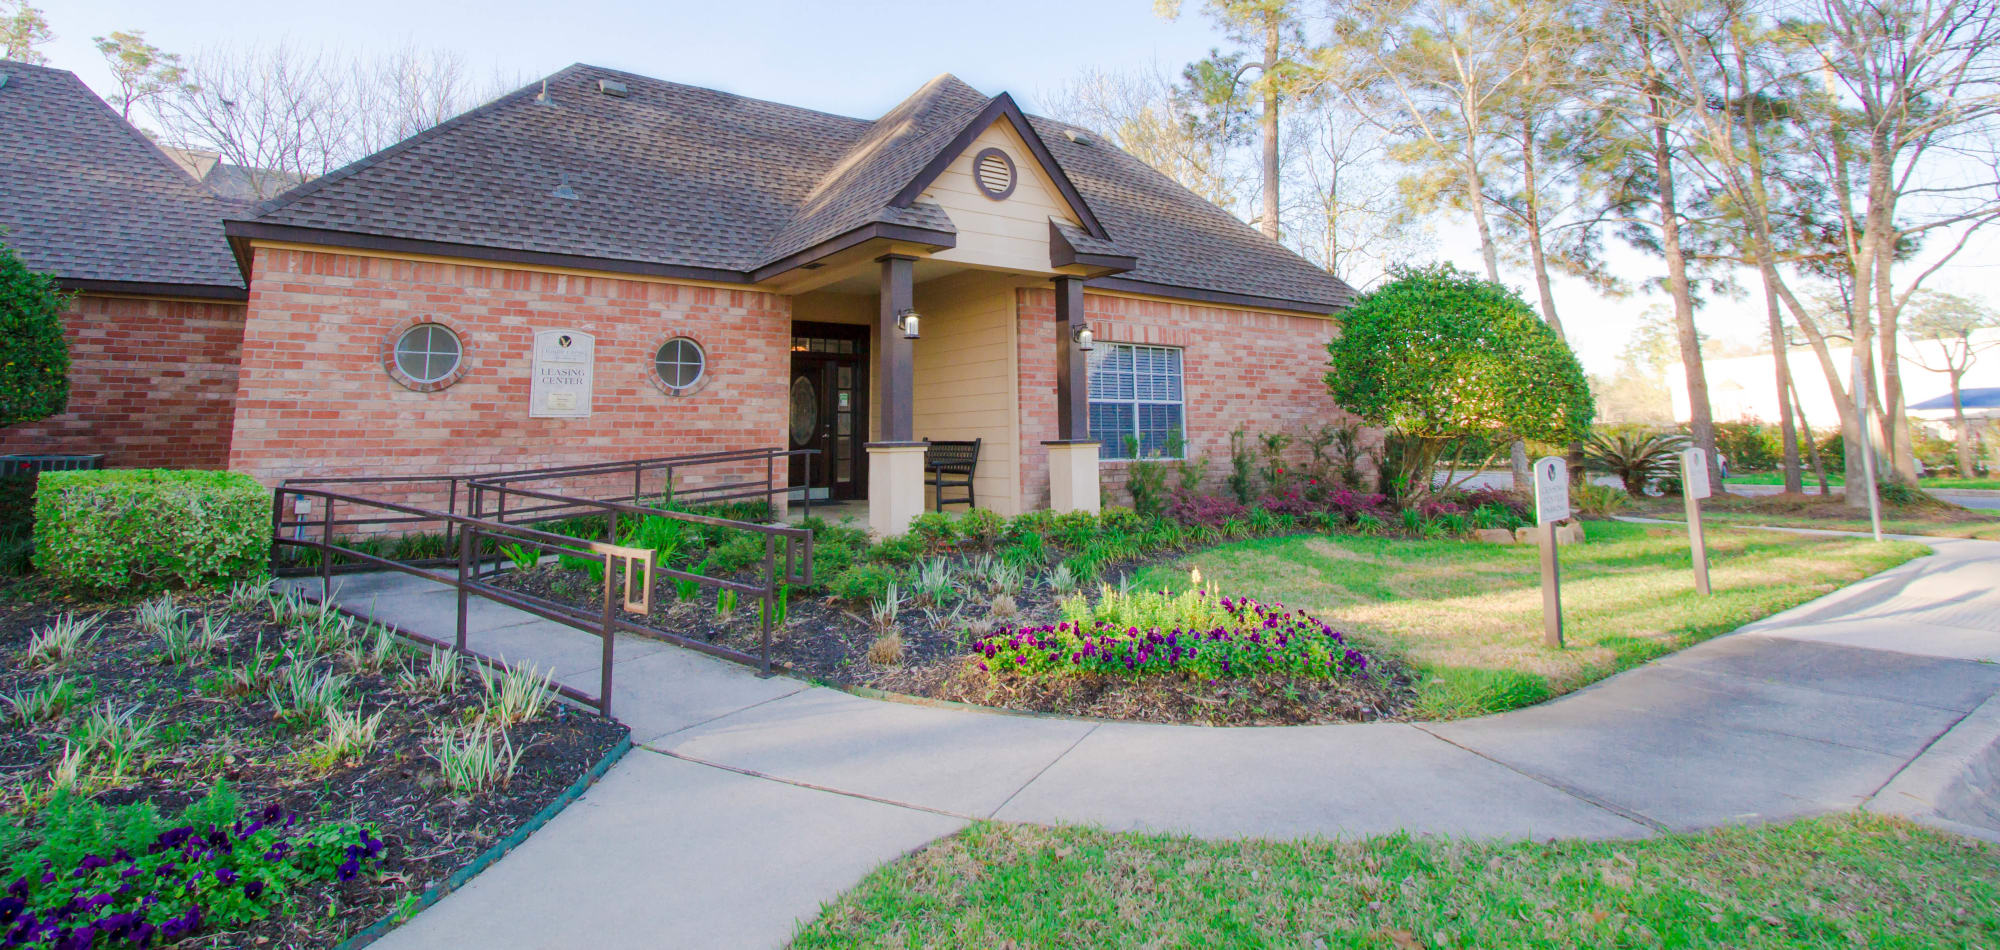 Entrance to the leasing office at Eagle Crest Apartments in Humble, Texas